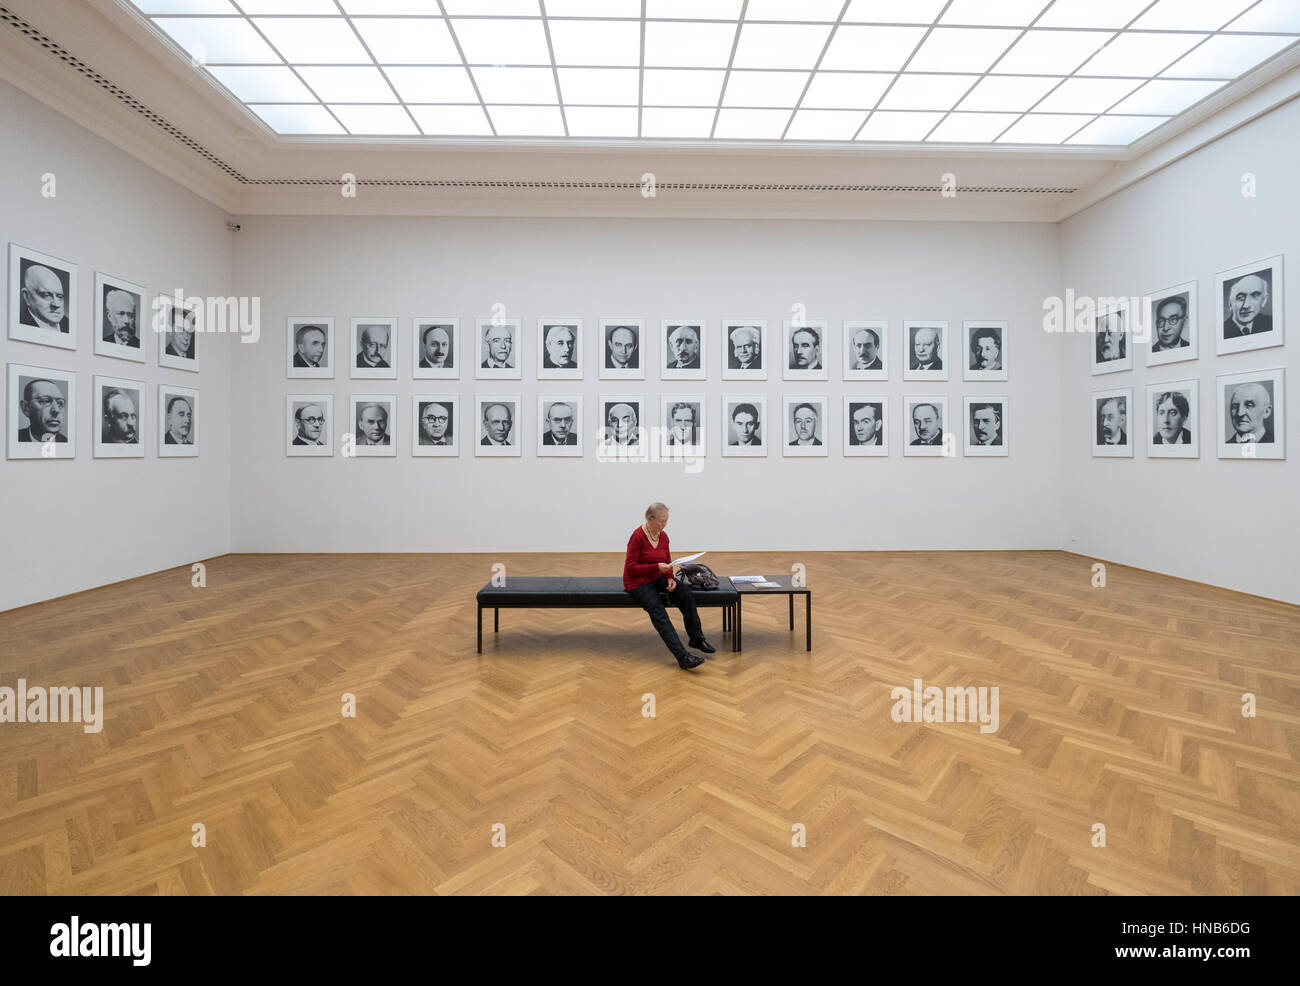 Photographs by Gerhard Richter '48 Portraits' at Albertinum art museum in Dresden, Germany. Stock Photo